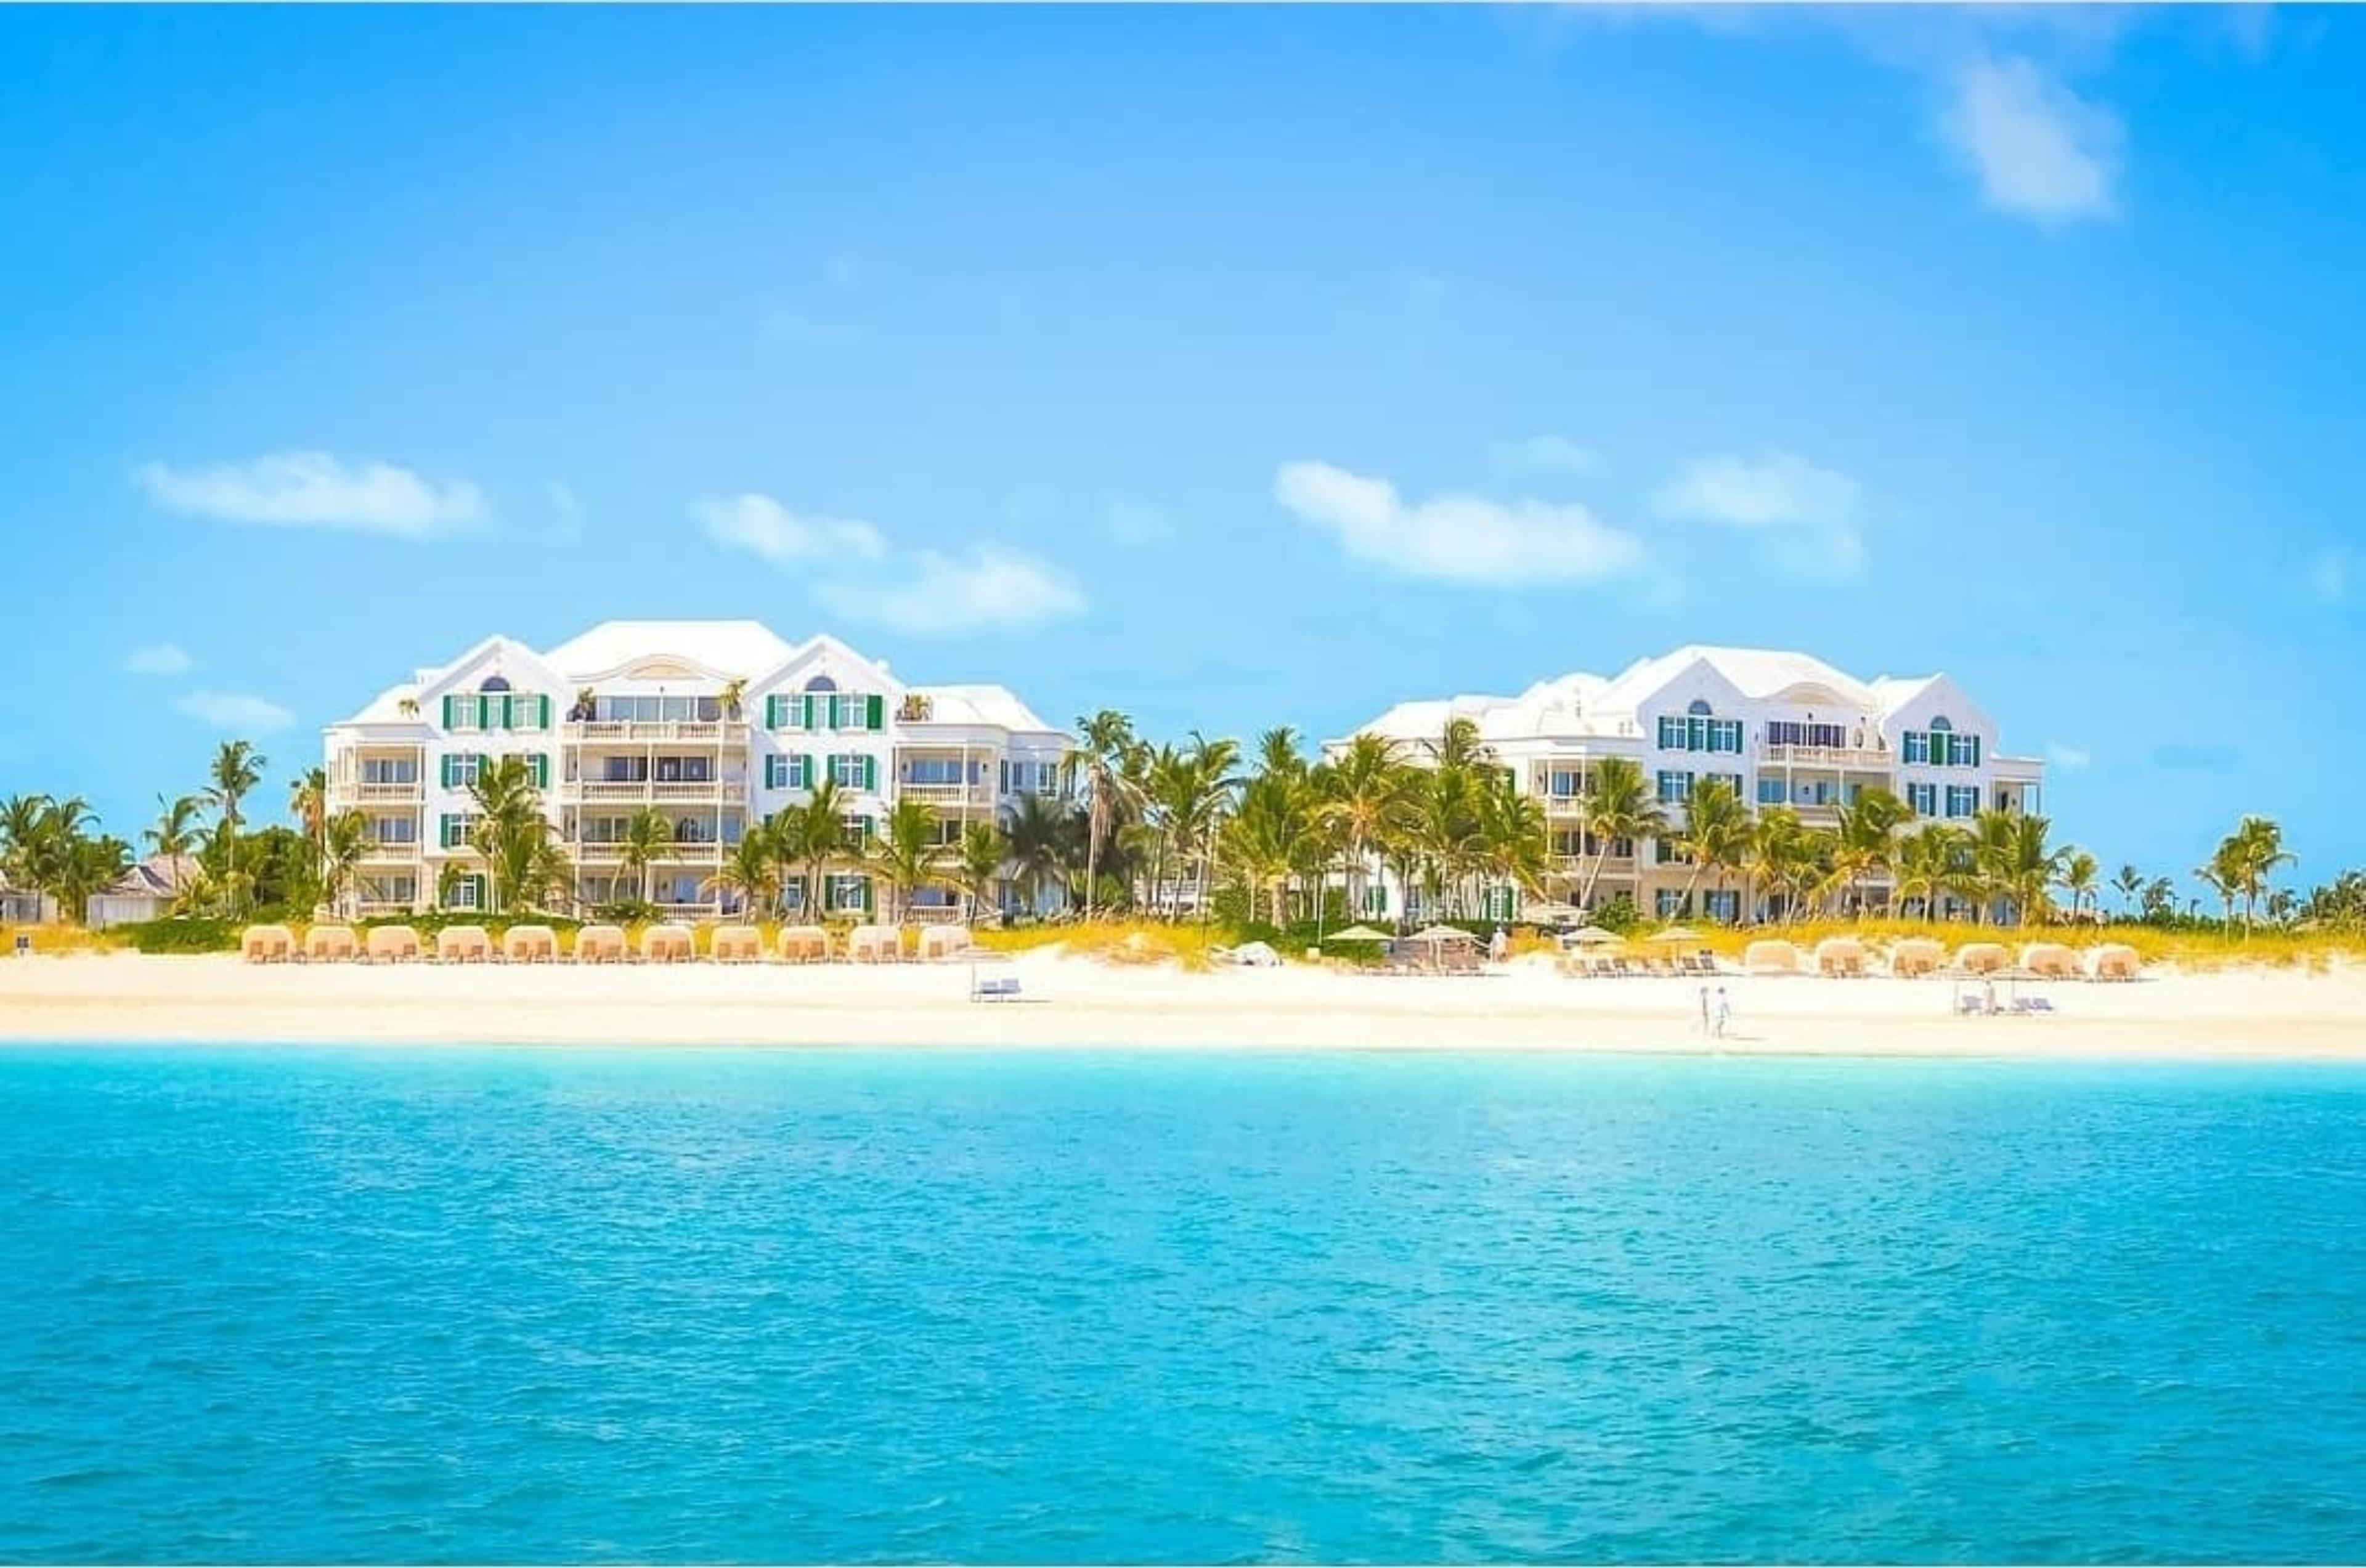 Point Grace - Providenciales, Turks & Caicos